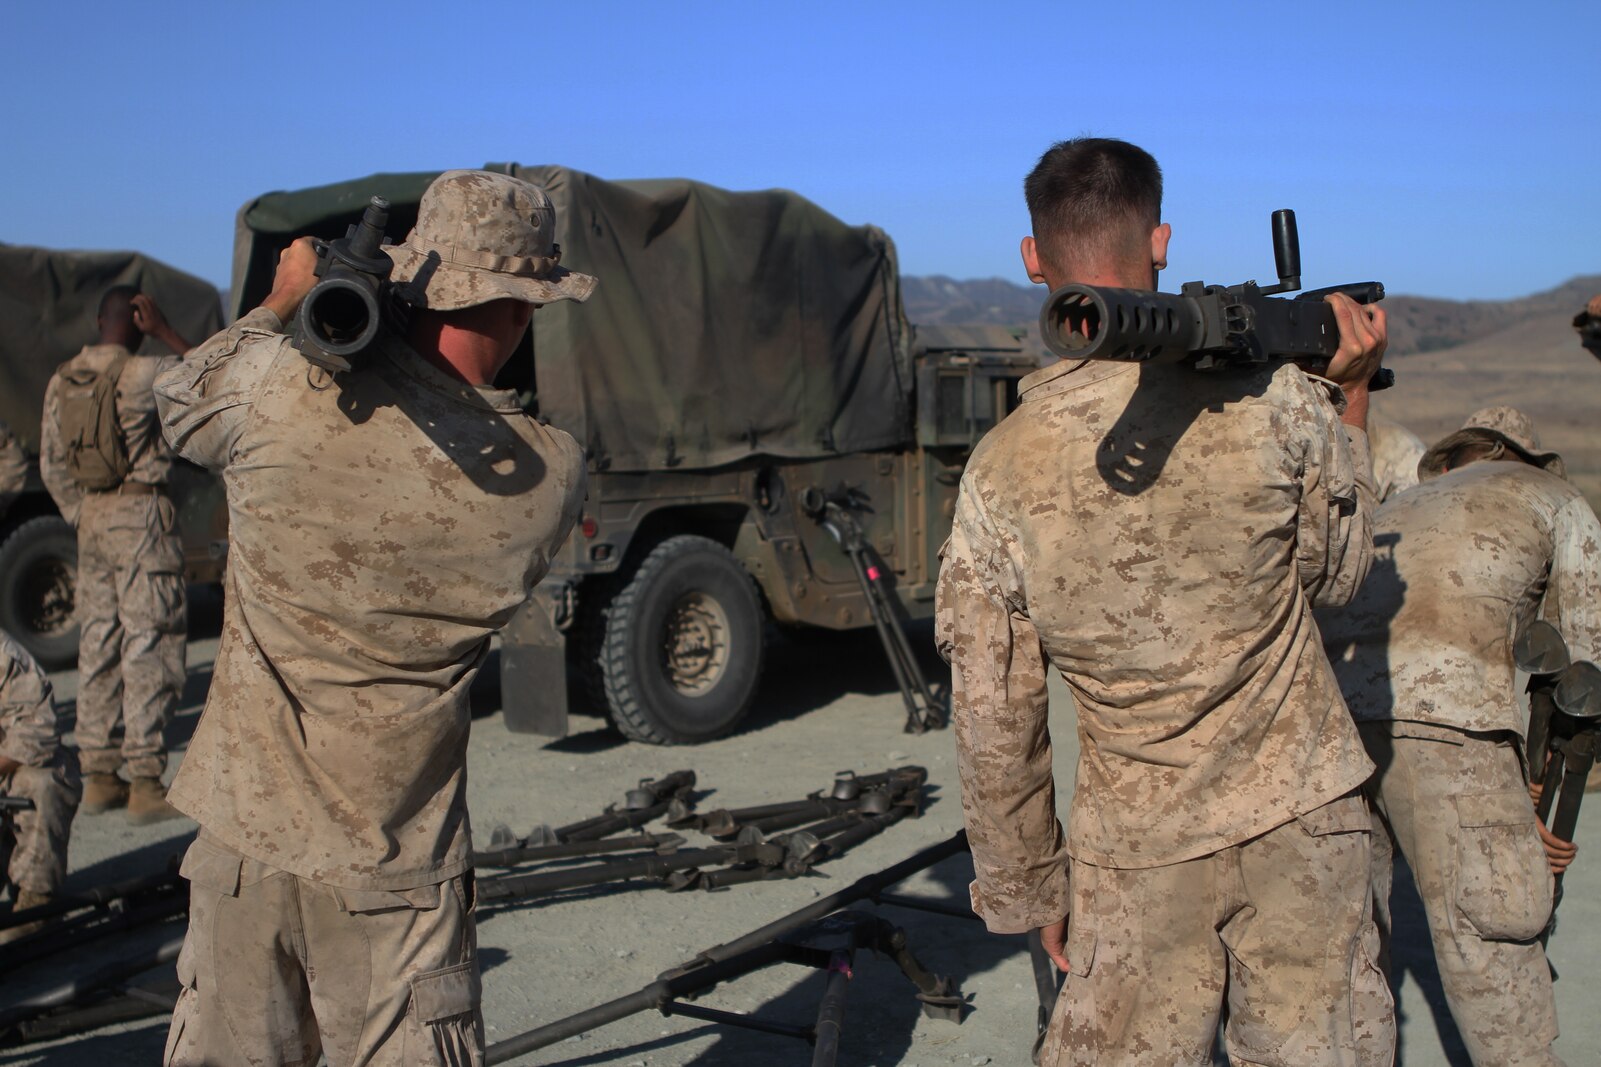 Marines with Ammo Company, 1st Supply Battalion, prepare to fire M2 .50-caliber machine guns aboard Marine Corps Base Camp Pendleton, Calif., Sept. 17, 2014. The range required Marines to demonstrate proficiency with M249 SAWs, M240Bs, M2s and Mk19s. The live-fire ranges were part of an annual training package to keep the Marines confident and proficient with each weapon system.